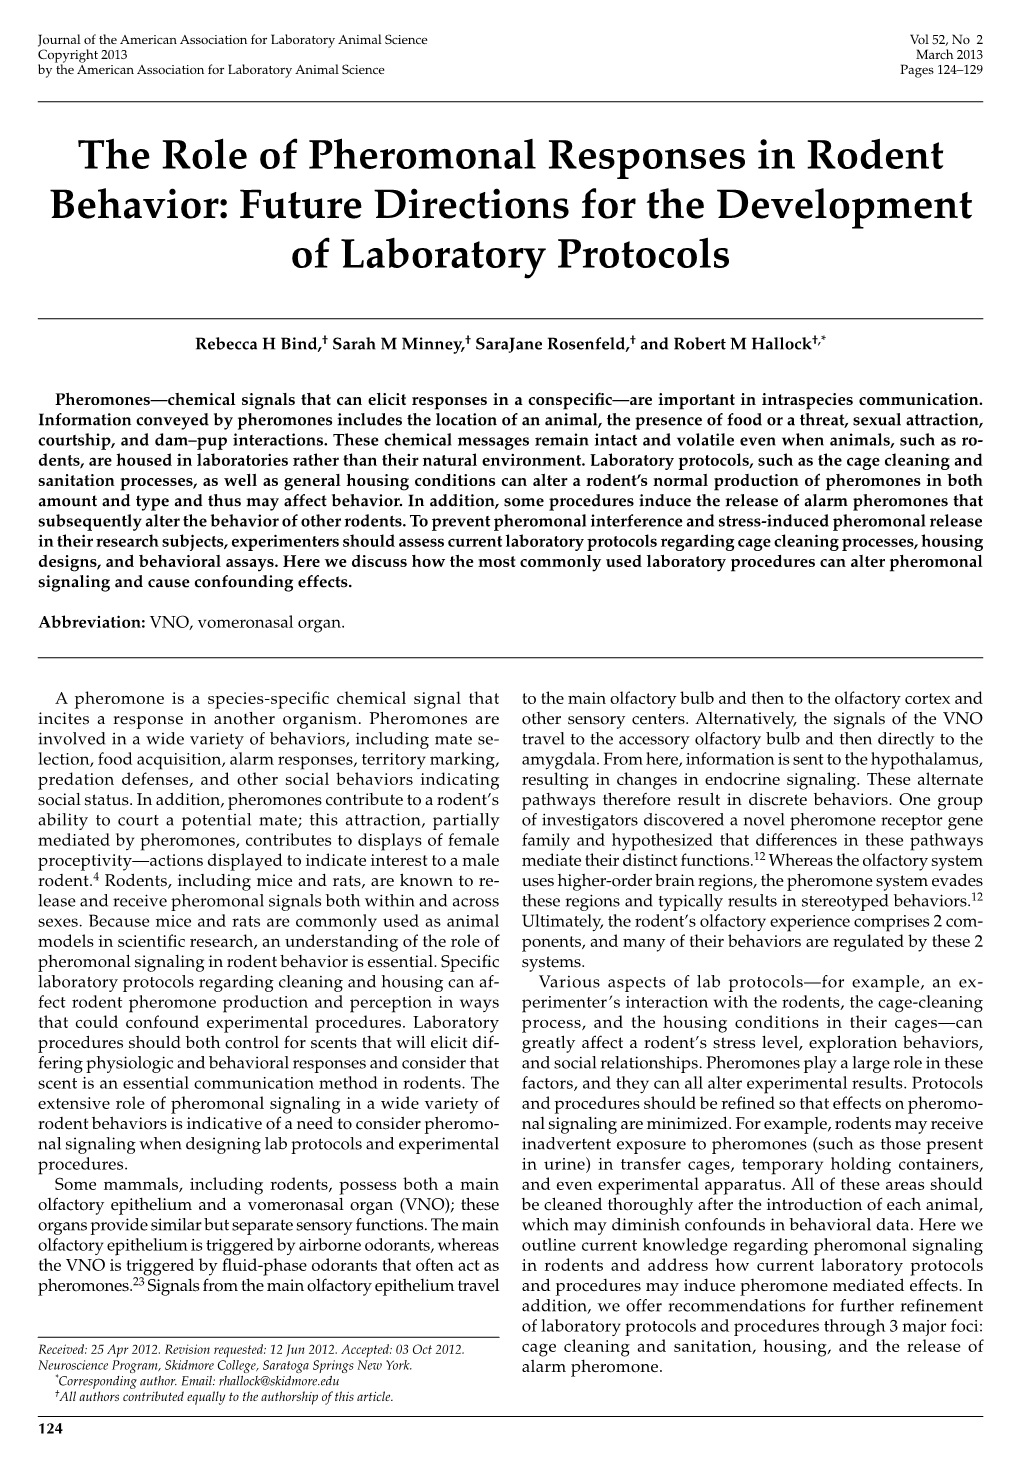 The Role of Pheromonal Responses in Rodent Behavior: Future Directions for the Development of Laboratory Protocols